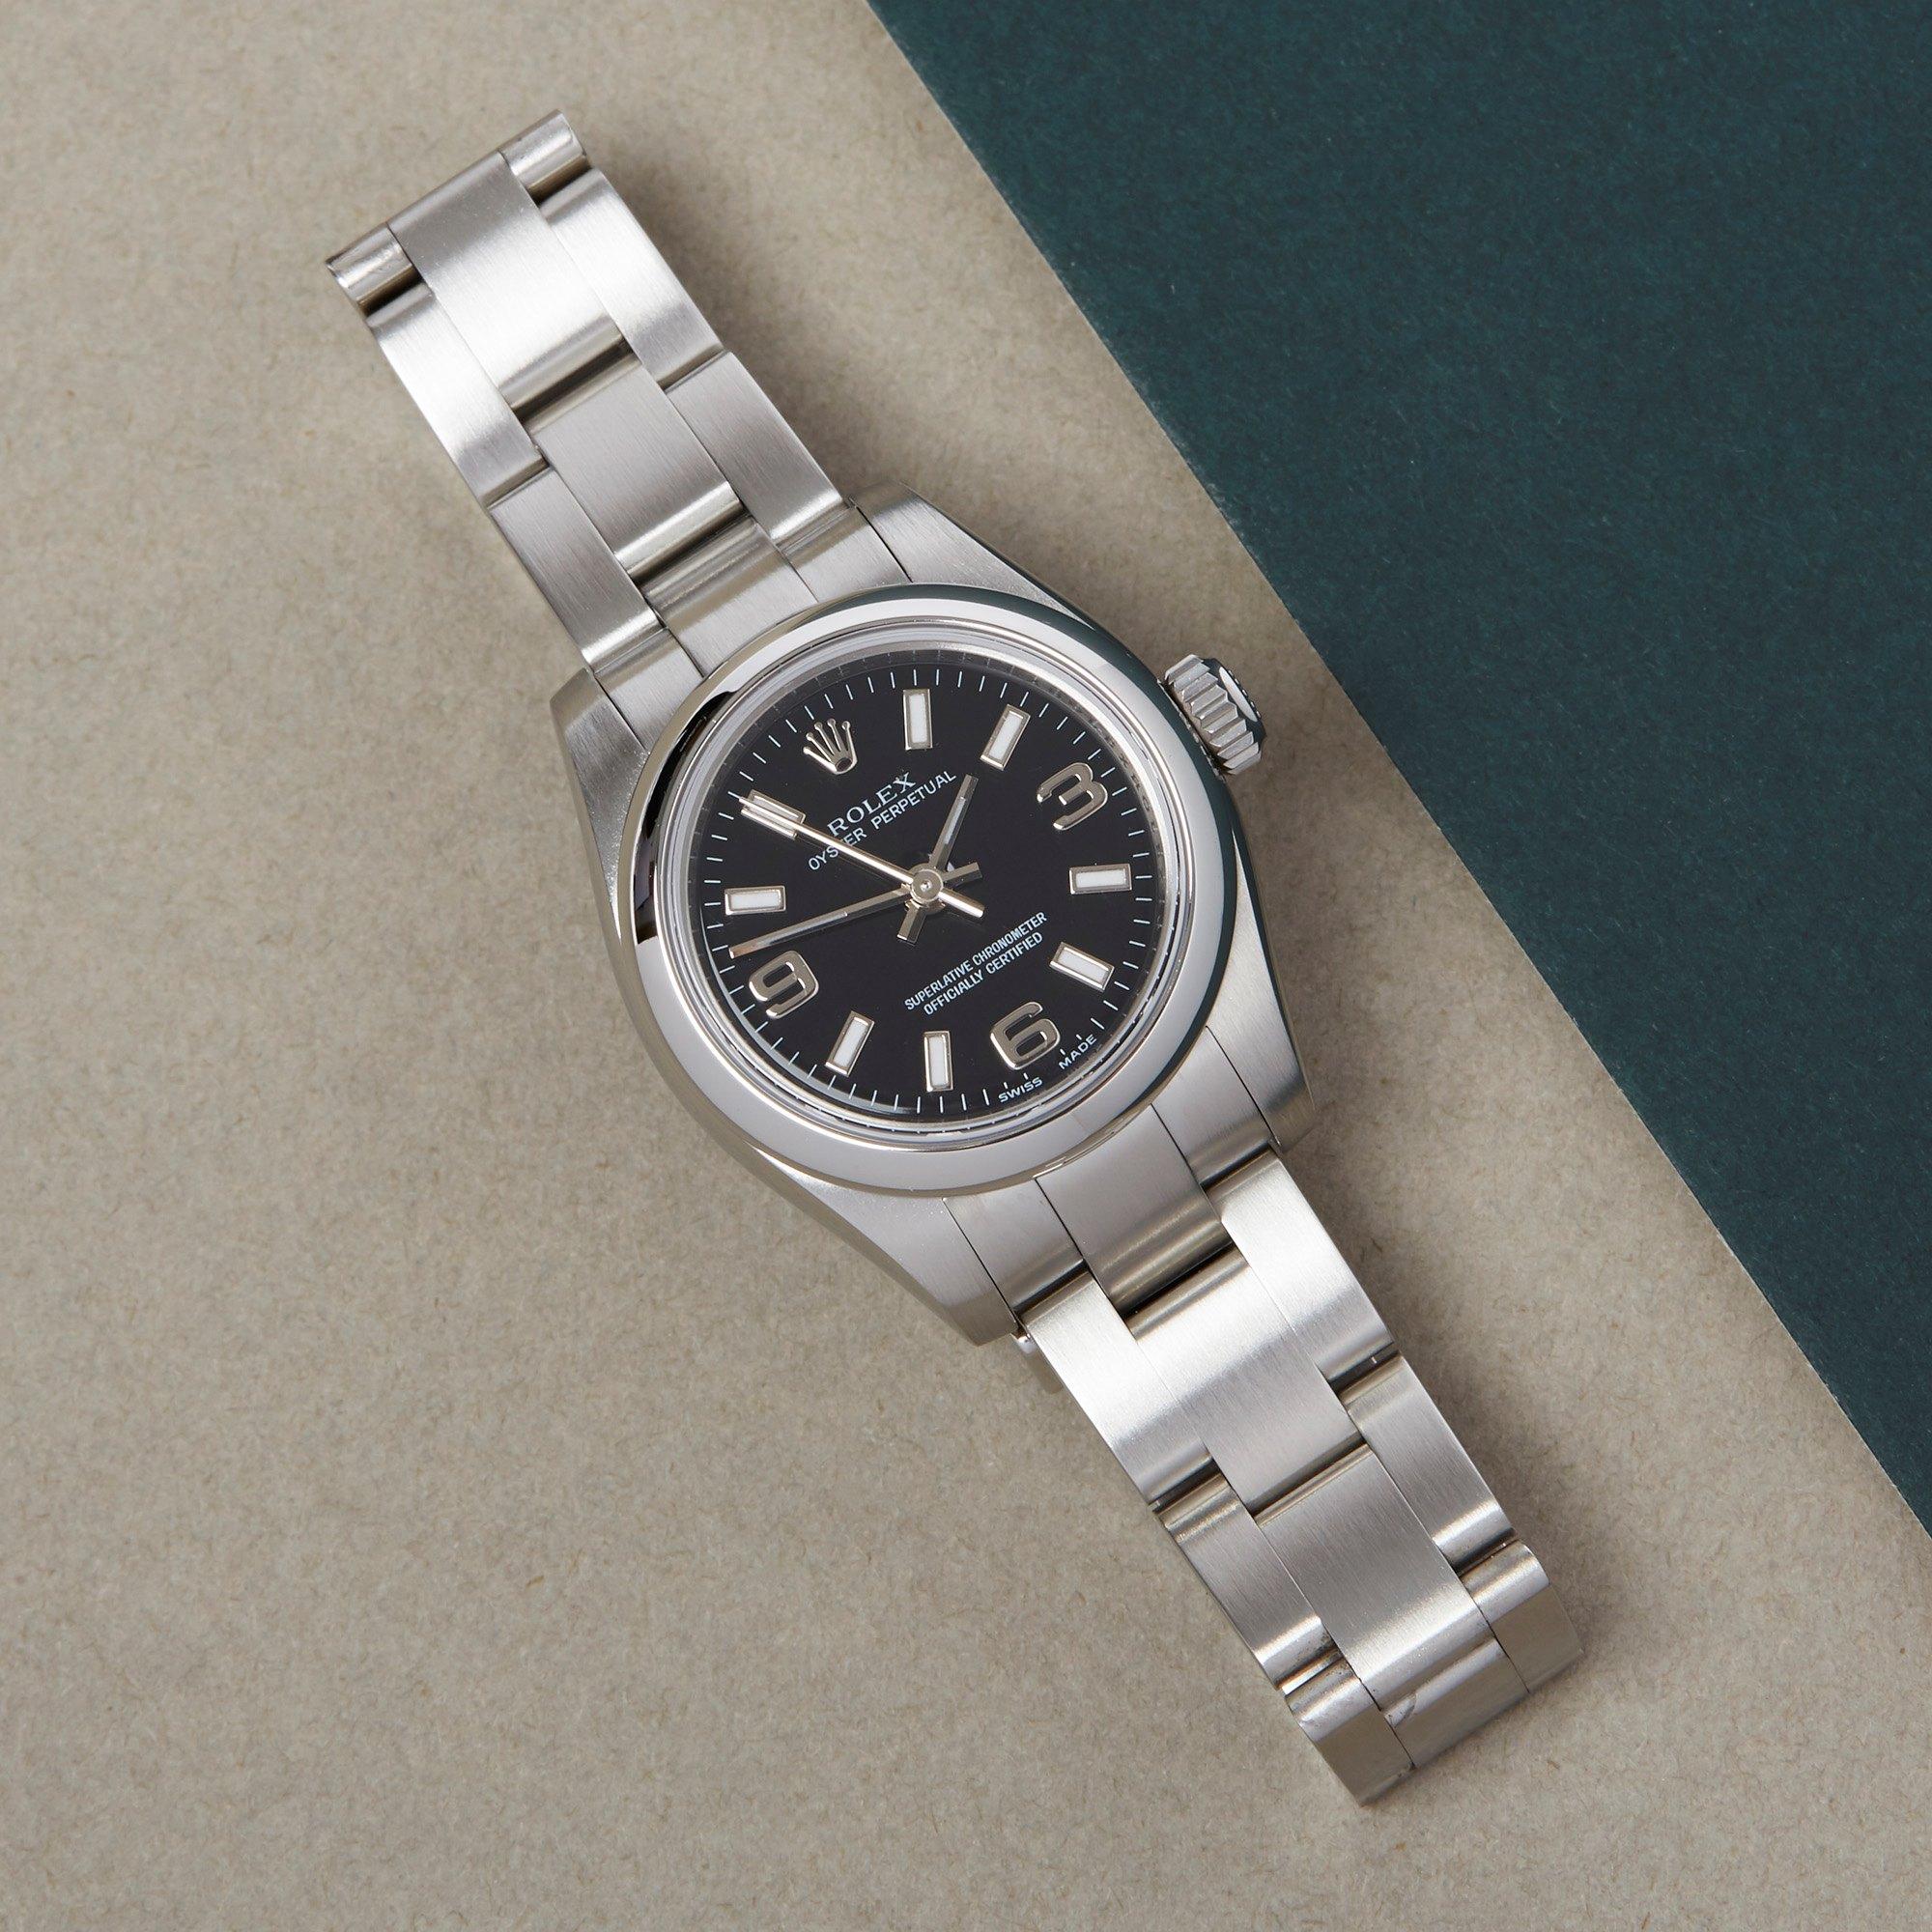 Xupes Reference: W007592
Manufacturer: Rolex
Model: Oyster Perpetual
Model Variant: 26
Model Number: 176200
Age: 2007
Gender: Ladies
Complete With: Rolex Box 
Dial: Black Baton
Glass: Sapphire Crystal
Case Size: 26mm
Case Material: Stainless